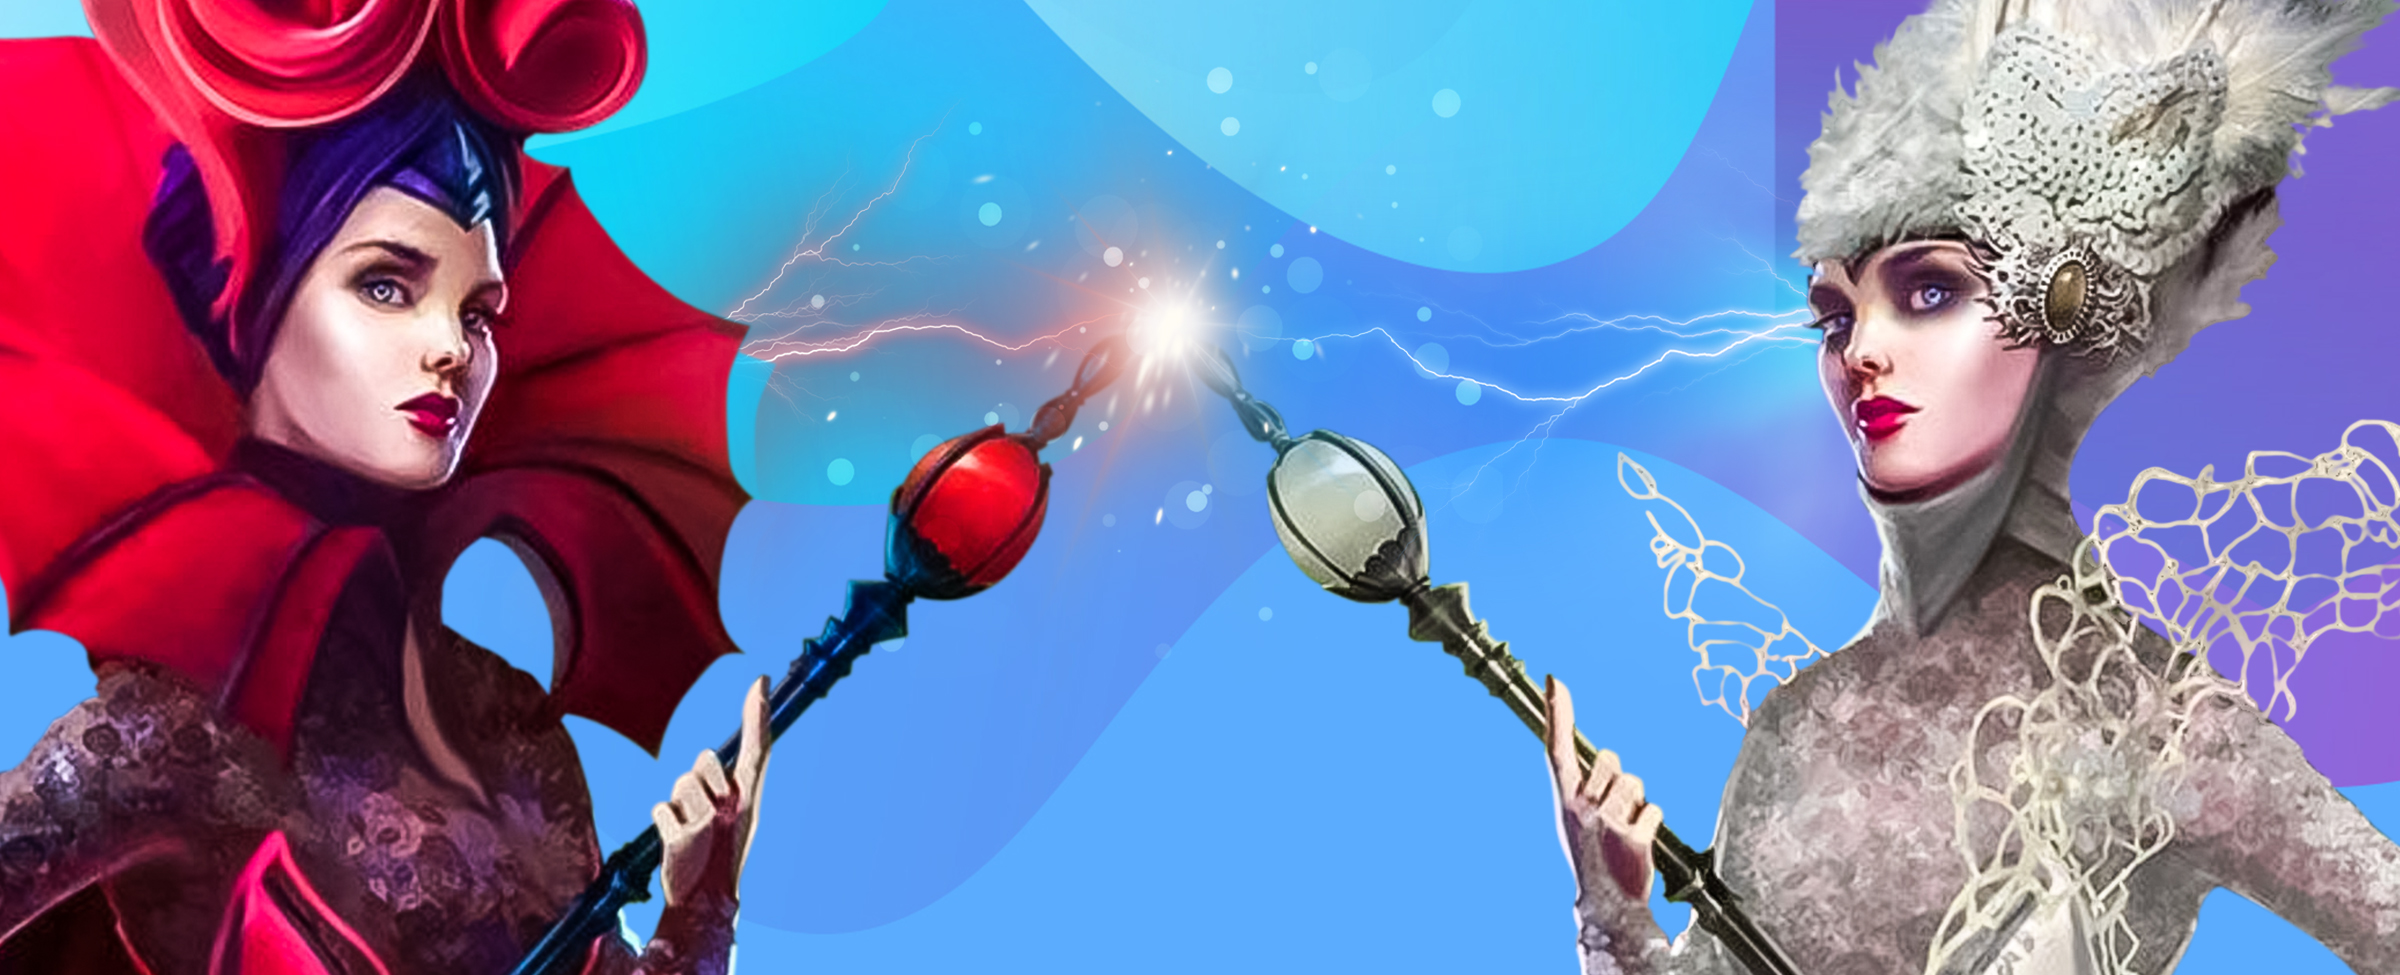 Two animated queens from the SlotsLV slot game Clash of queens stand either side, facing inward. The queen on the left wears a red oversized frill-neck, while the other wears a metallic white and silver suit with a tall, white furry hat. Each holds a scepter with a pointed tip, meeting in the center of the image, creating an electrical flash of light.